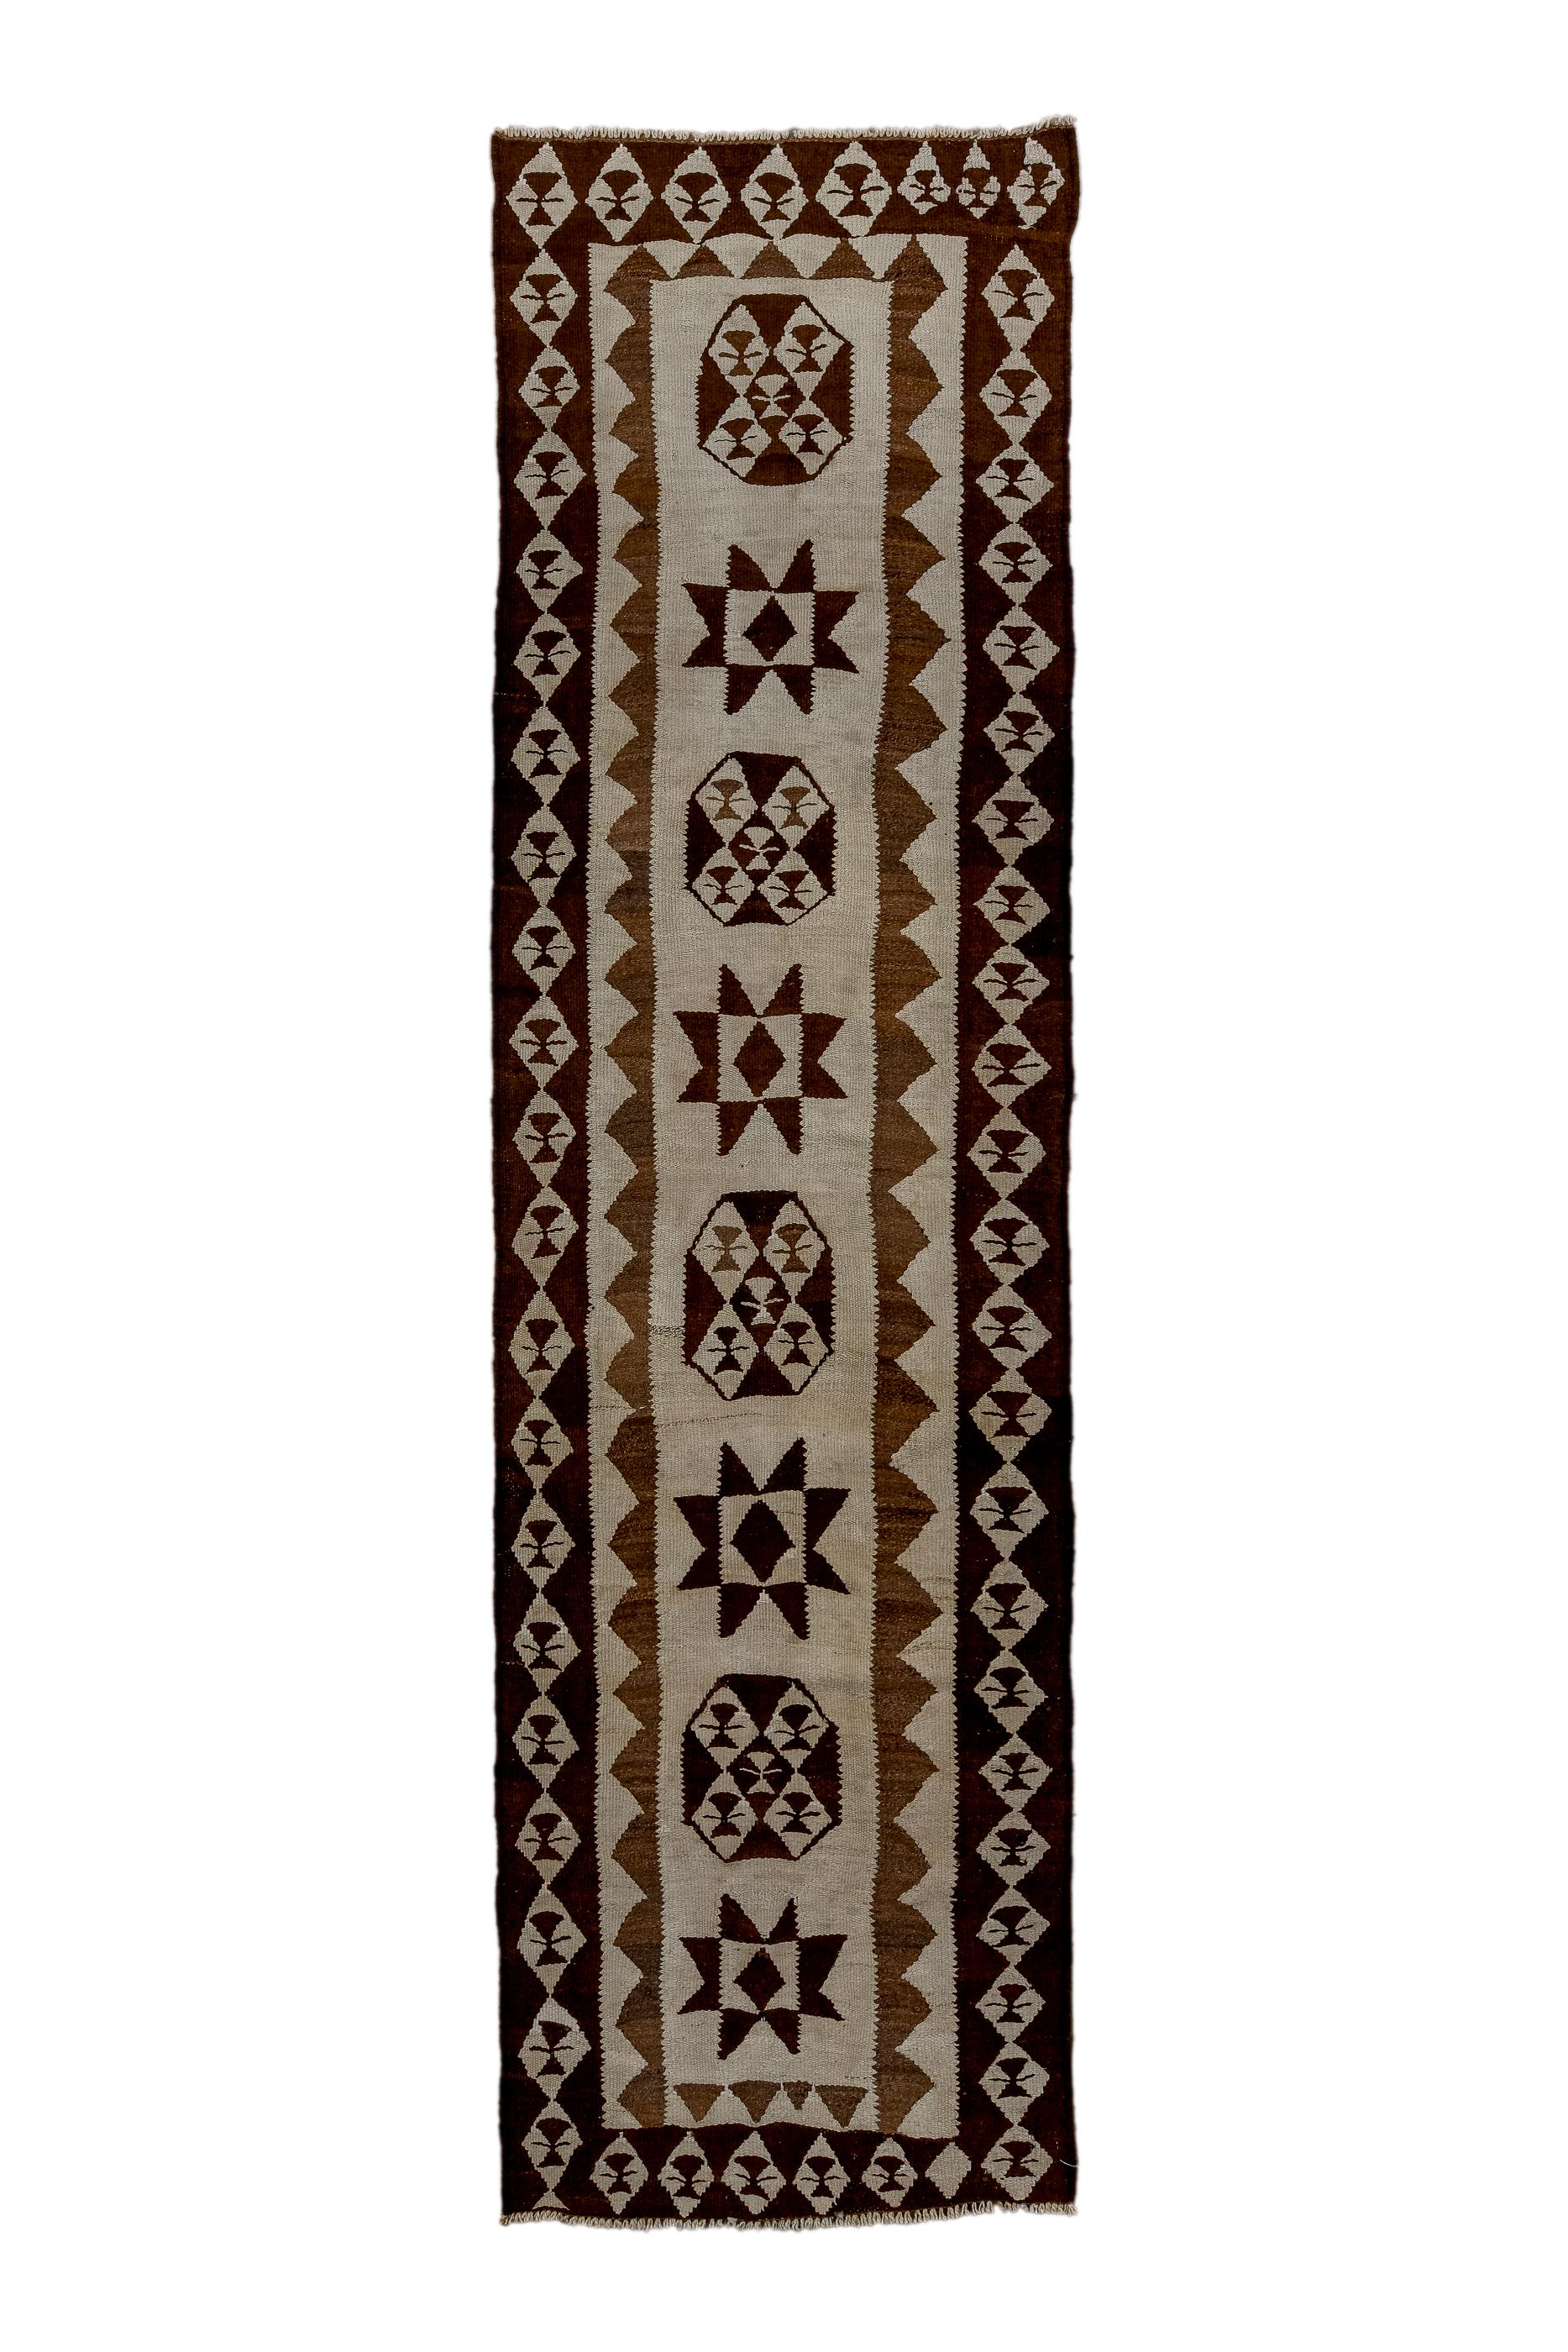 This tapestry woven flatweave has reduced the palette to ecru, darkest brown and deep red, and the design to an open field with an alternation of stars and X-centred octagons. Main border of chains of ecru diamonds and an inner triangle reciprocal